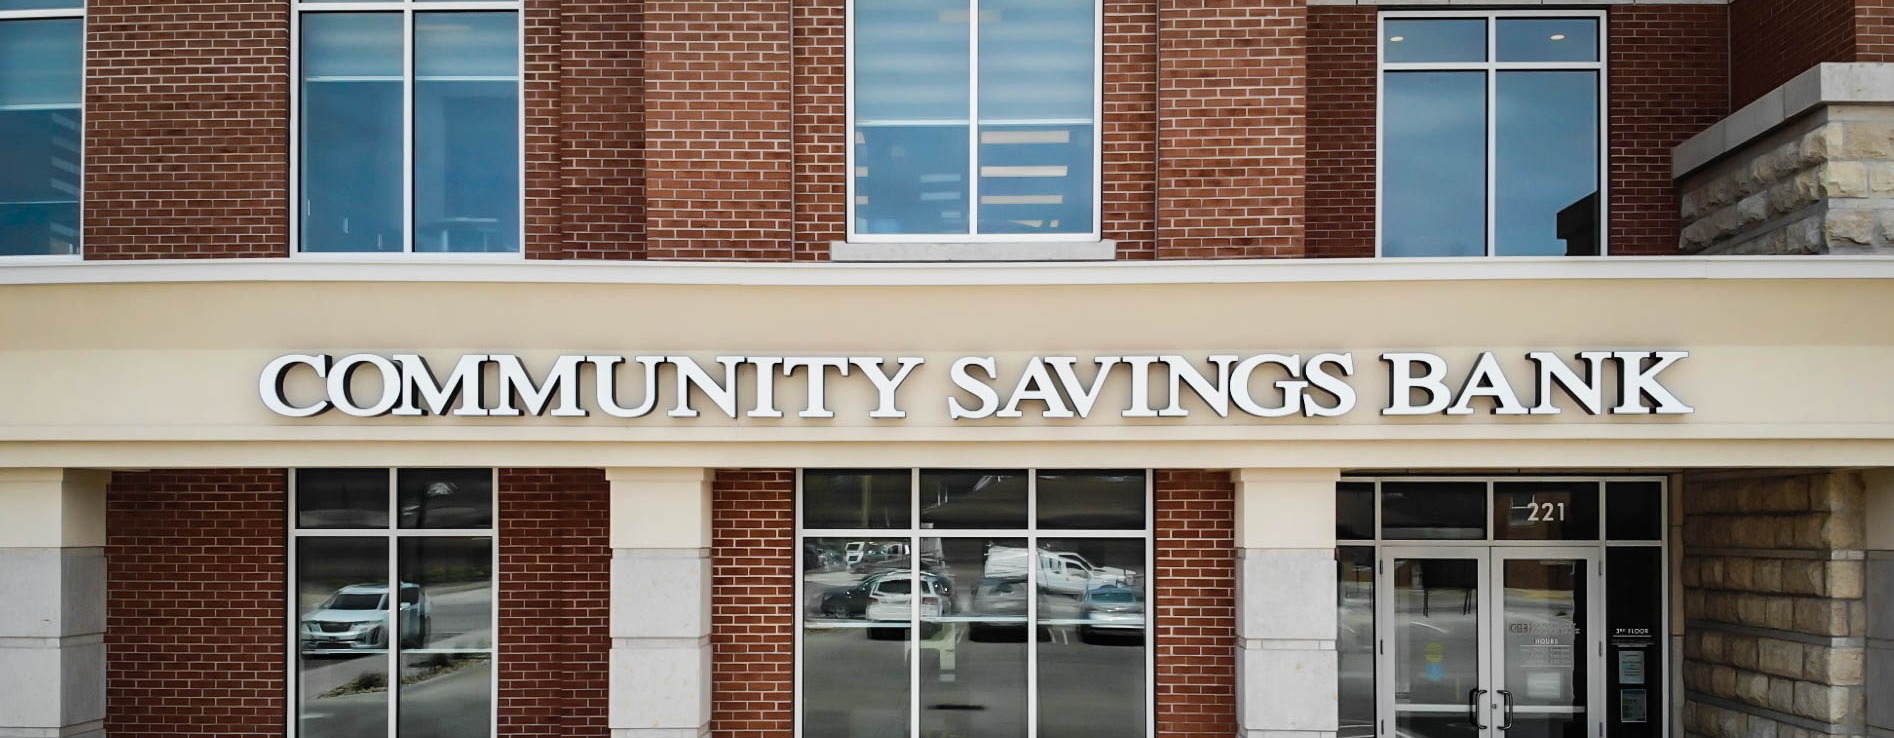 An image of the Community Savings Bank sign on one of their buildings.